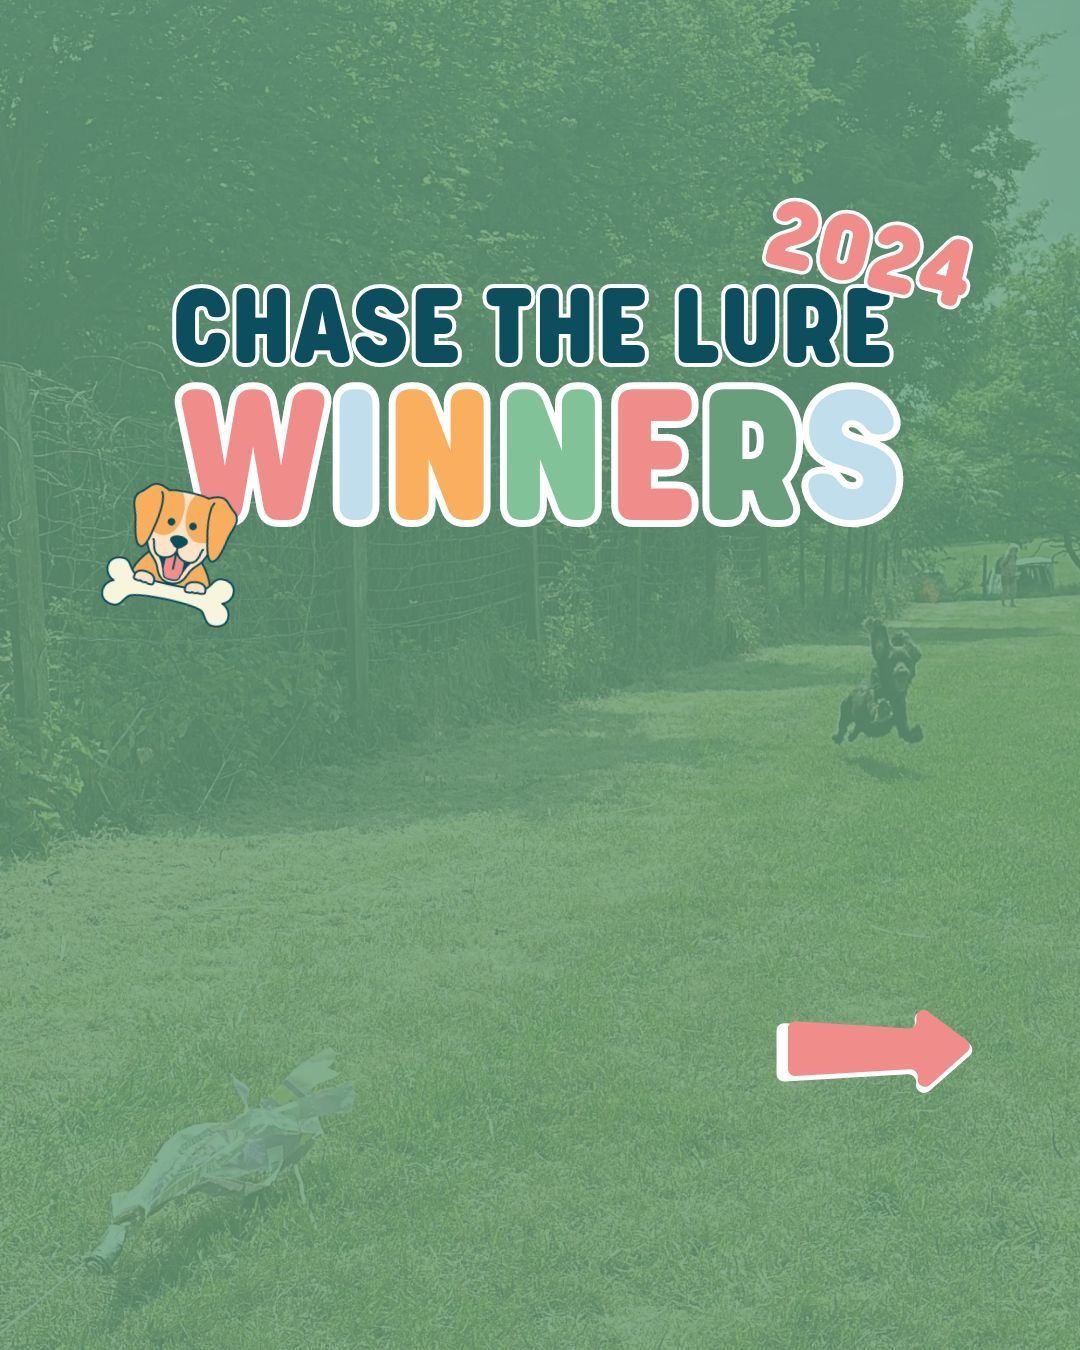 It was so lovely to see so many of you trying out the Chase the Lure last weekend! 🐕 Check out the top 10 winners from each day... both long and short legged! 

Fasted Dog of the Day was sponsored by the awesome @nonstopdogwear and @altonsportsuk wh